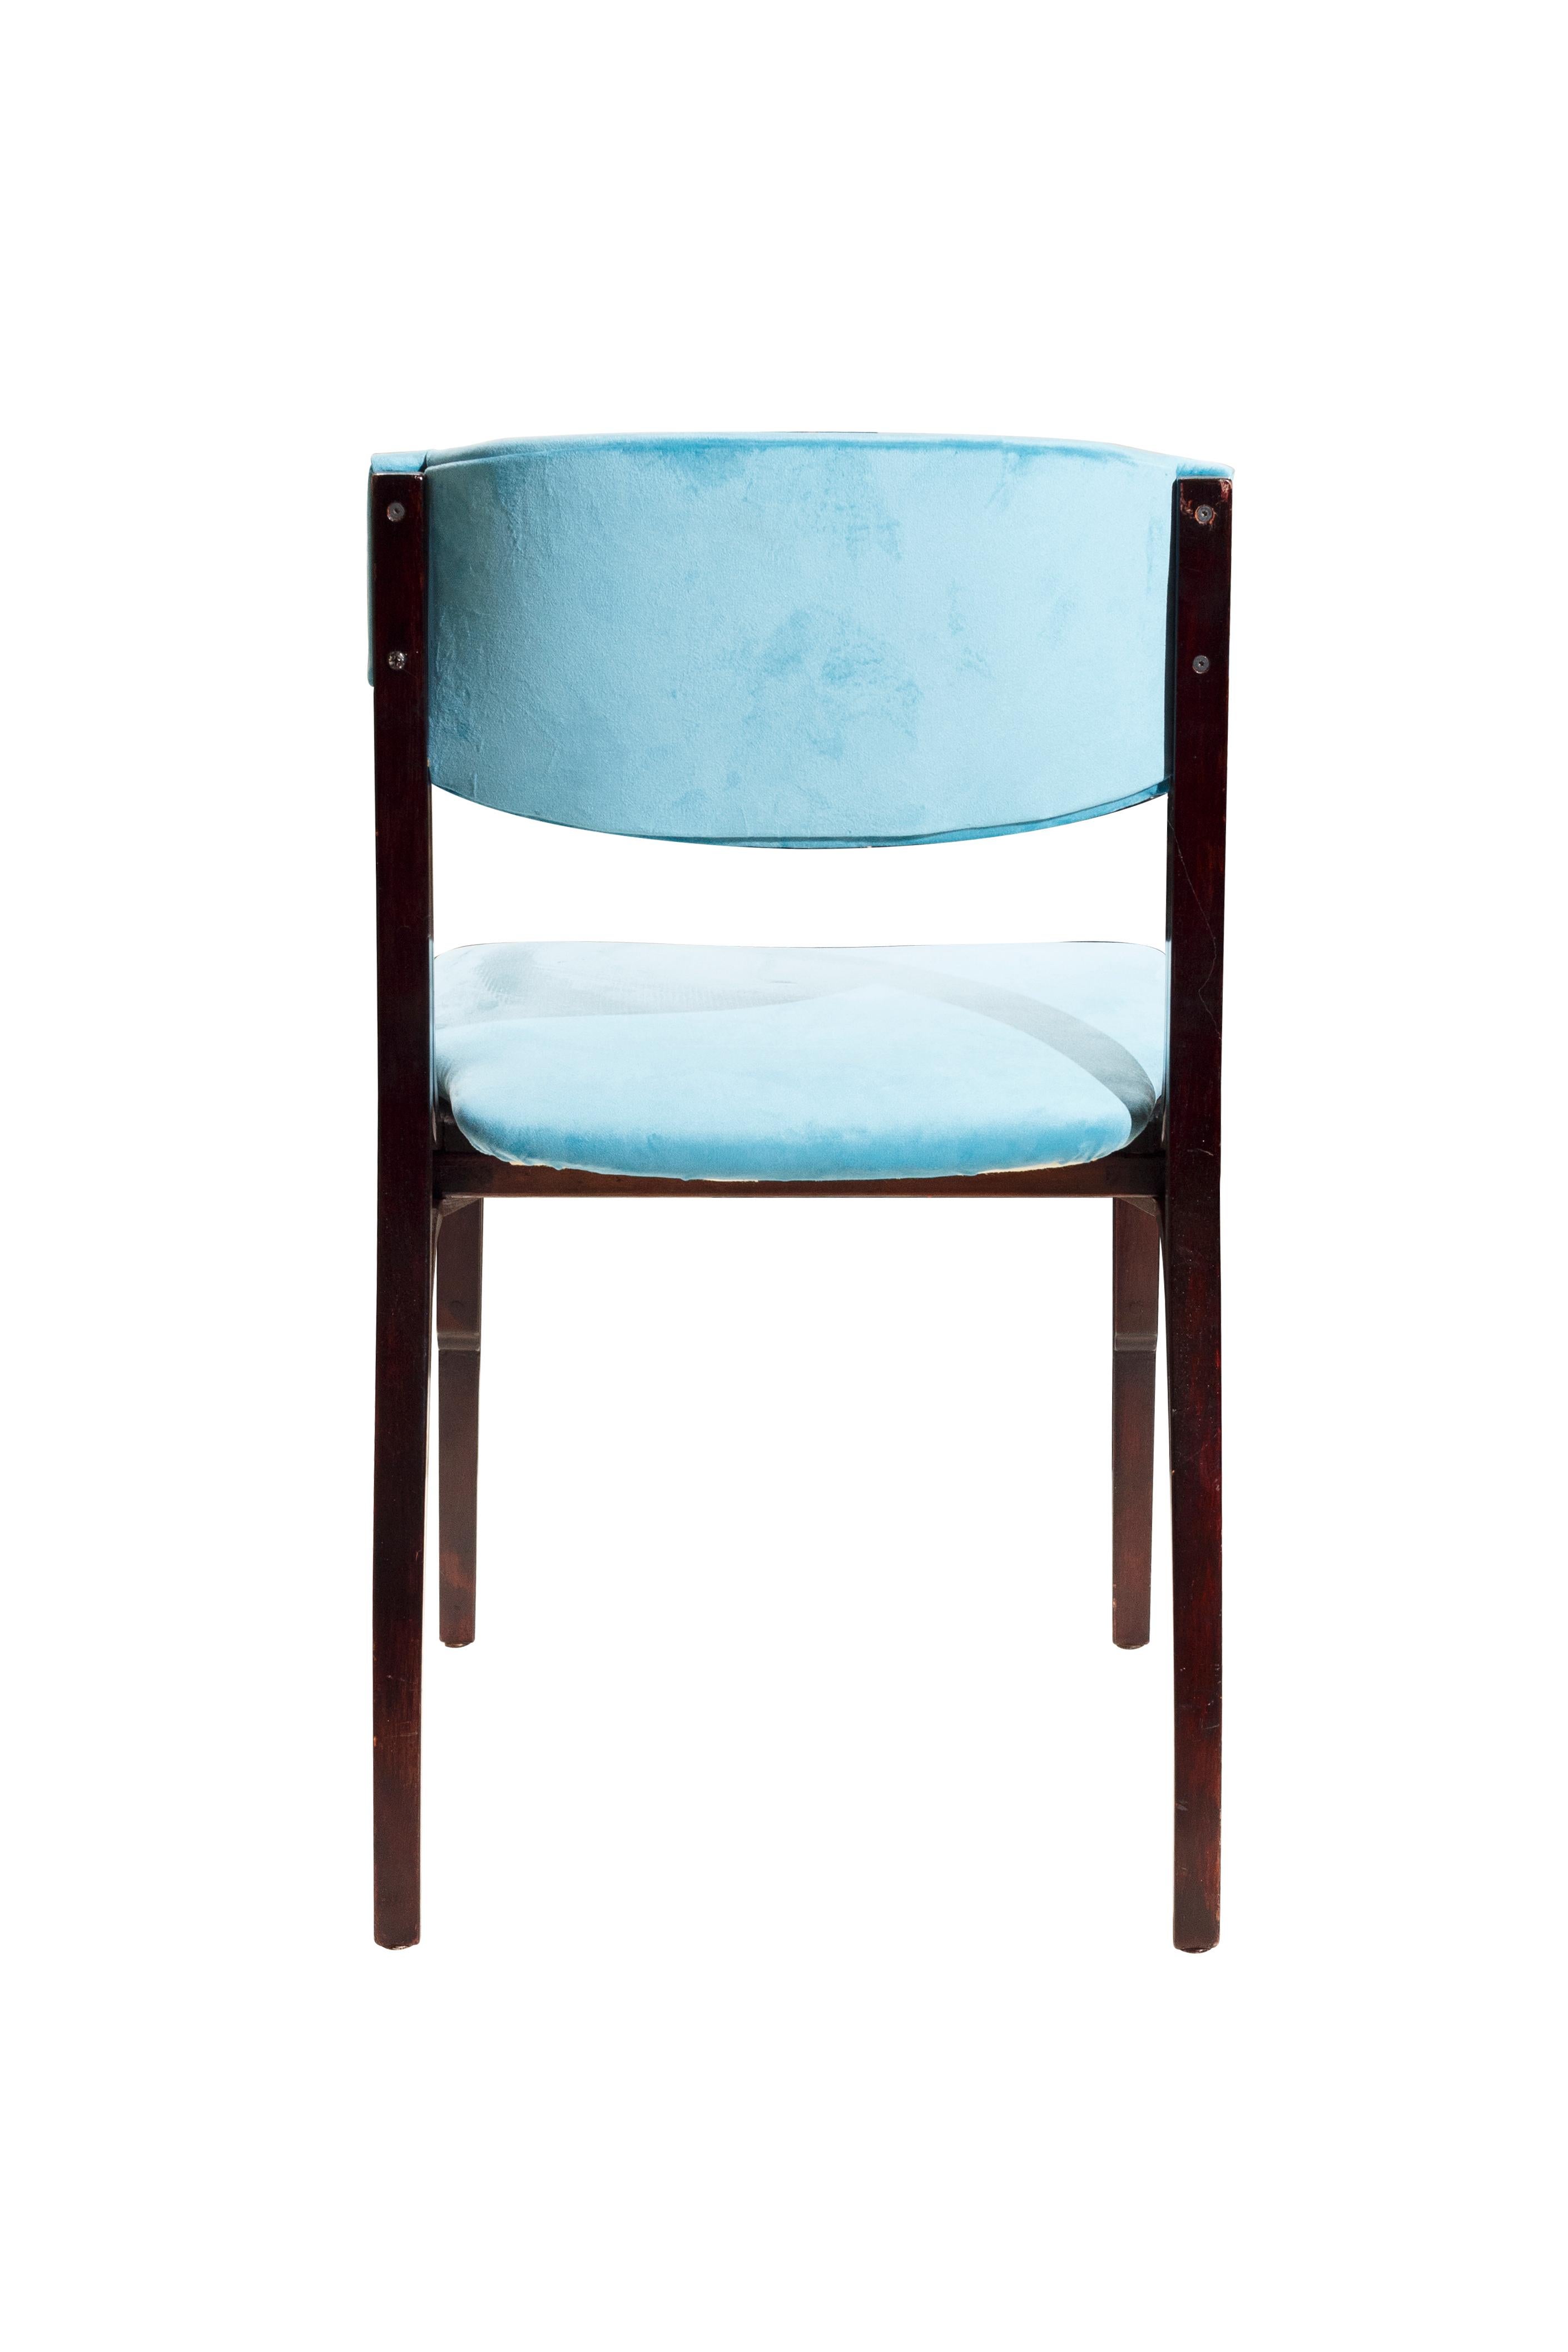 G.F. Frattini 5 Blue Velvet Chairs Mid-Century Modern From Cantieri Carugati In Good Condition For Sale In Lucca, IT